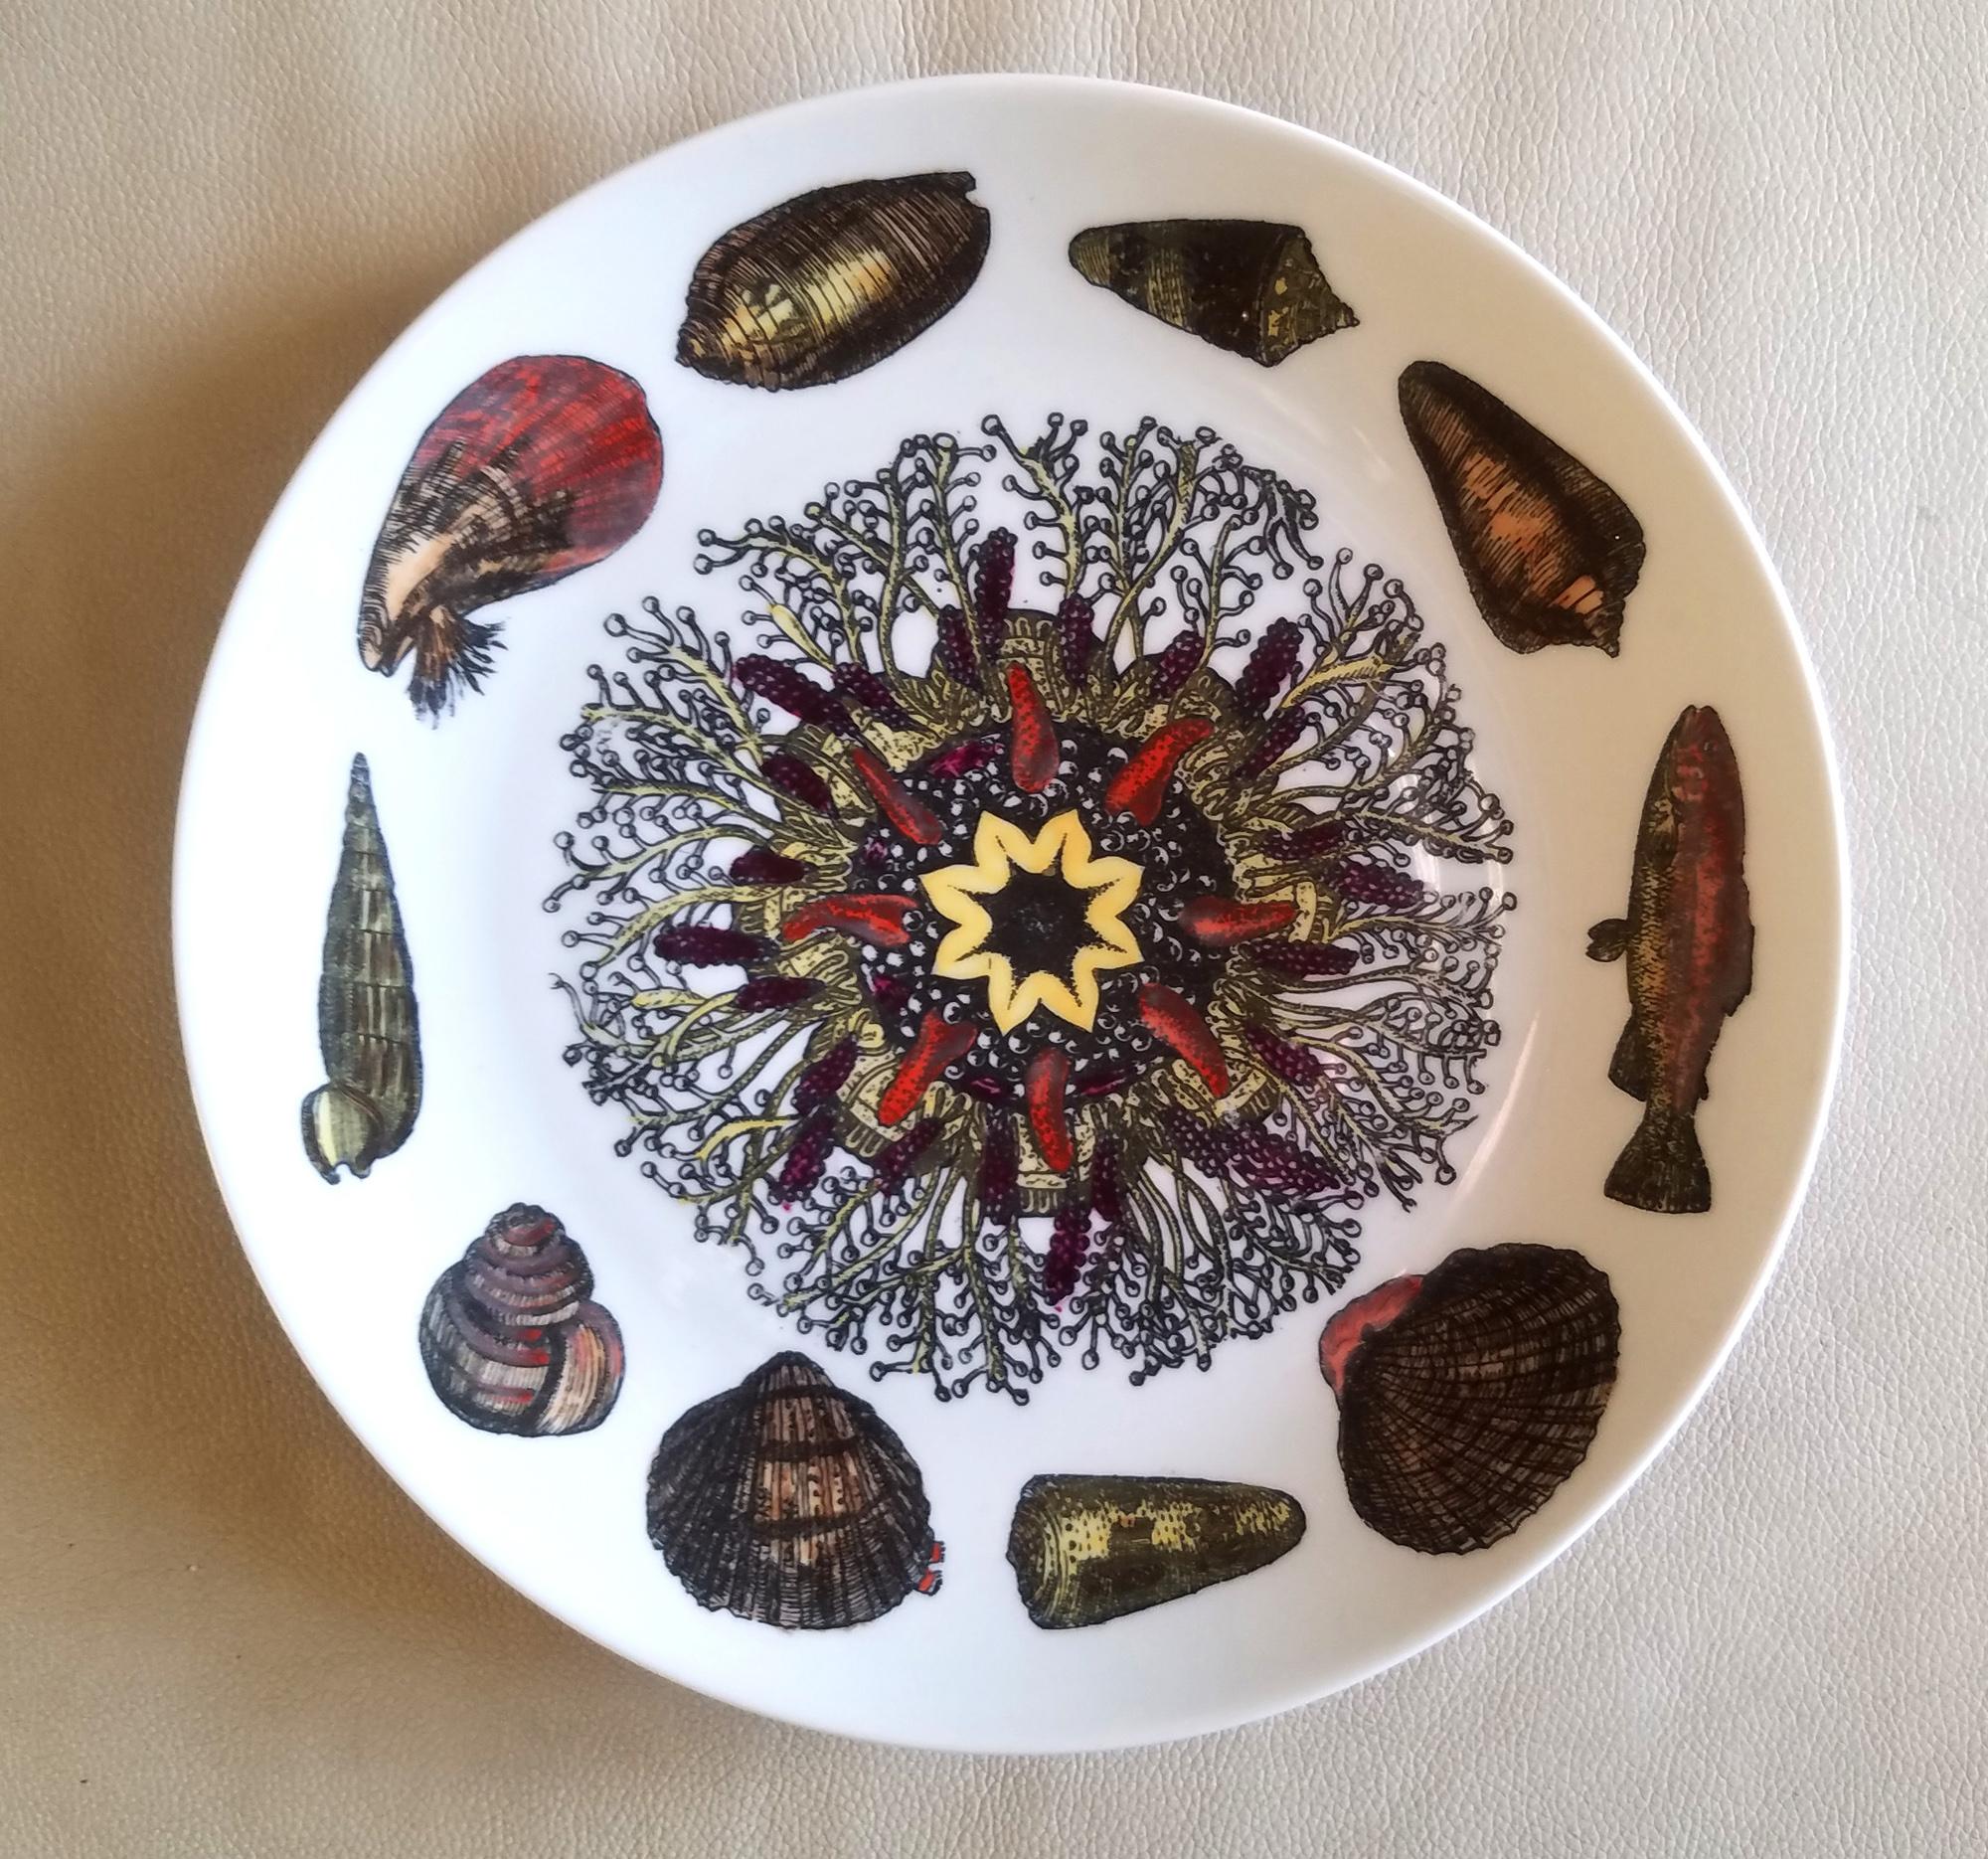 Piero Fornasetti Porcelain Conchiglie Seashell Set of Plates with Mollusks For Sale 4